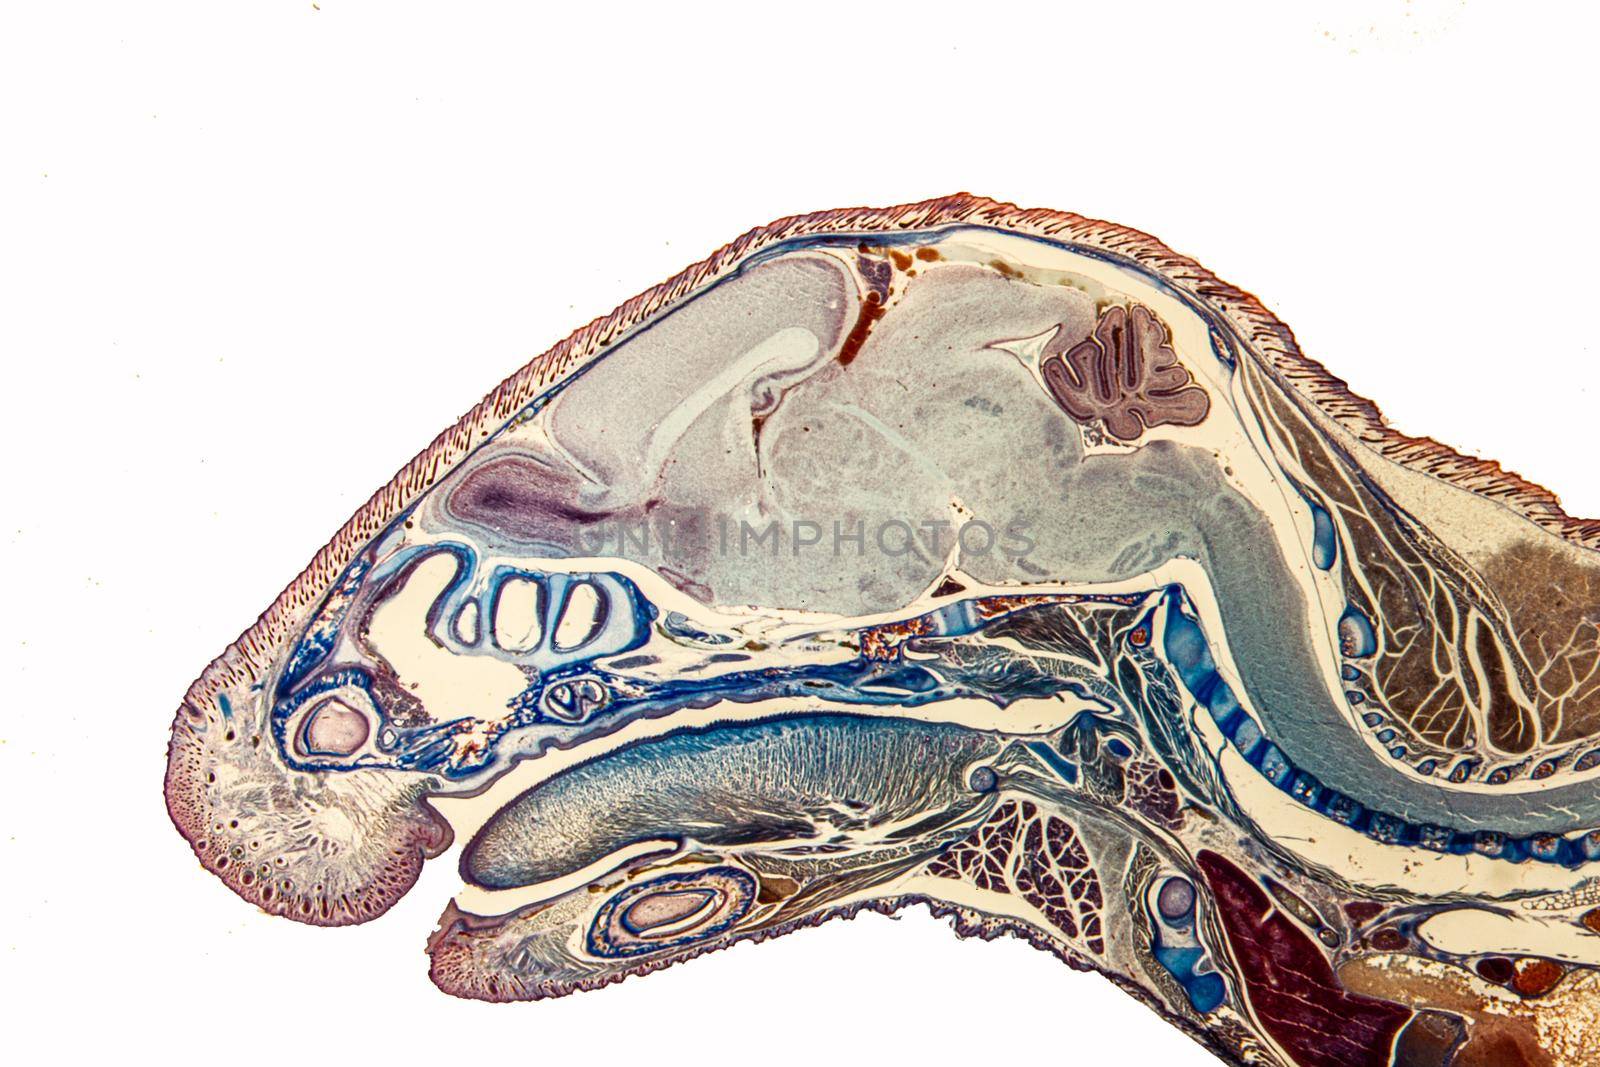 Longitudinal section of mouse head with brain, spinal cord and tongue